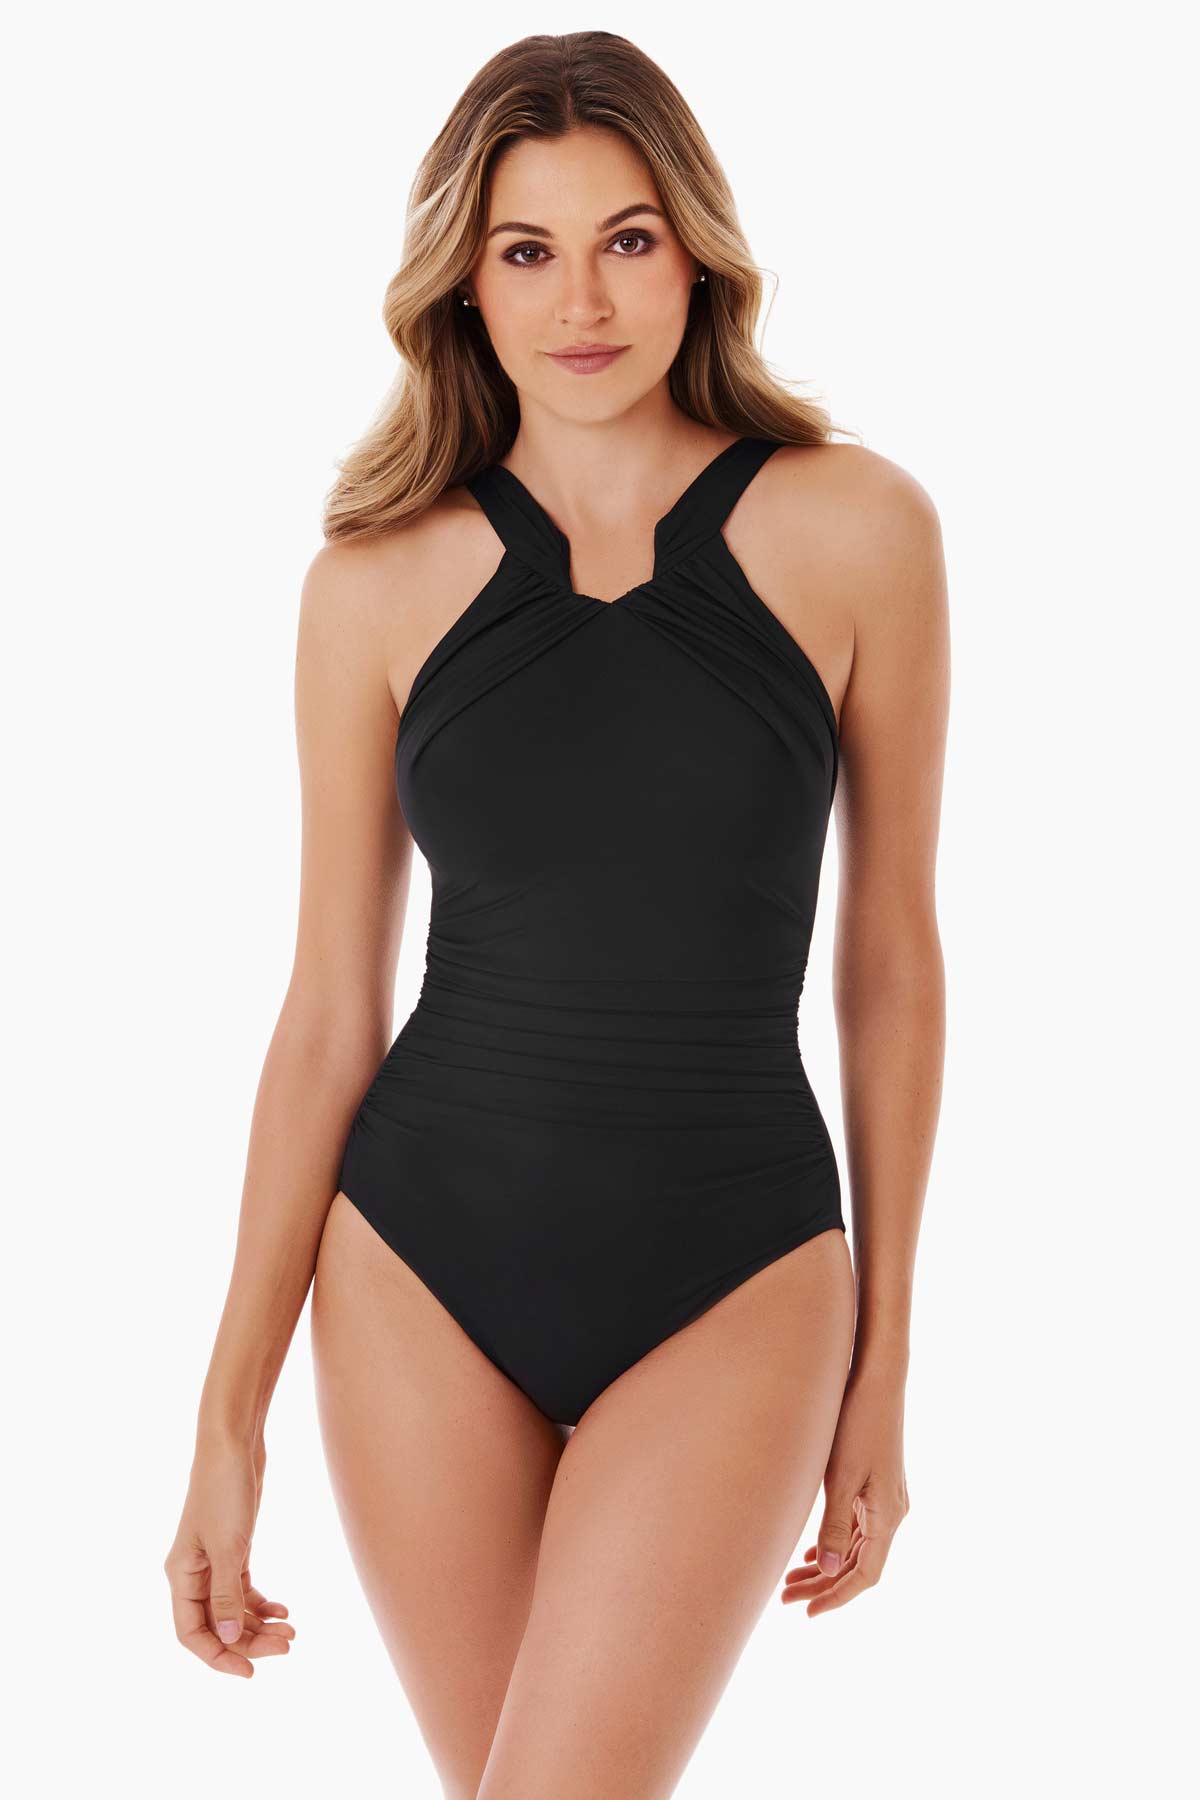 No Brand, Swim, Black Padded Bra Cups Strappy Cut Outs Halter One Piece  Swimsuit